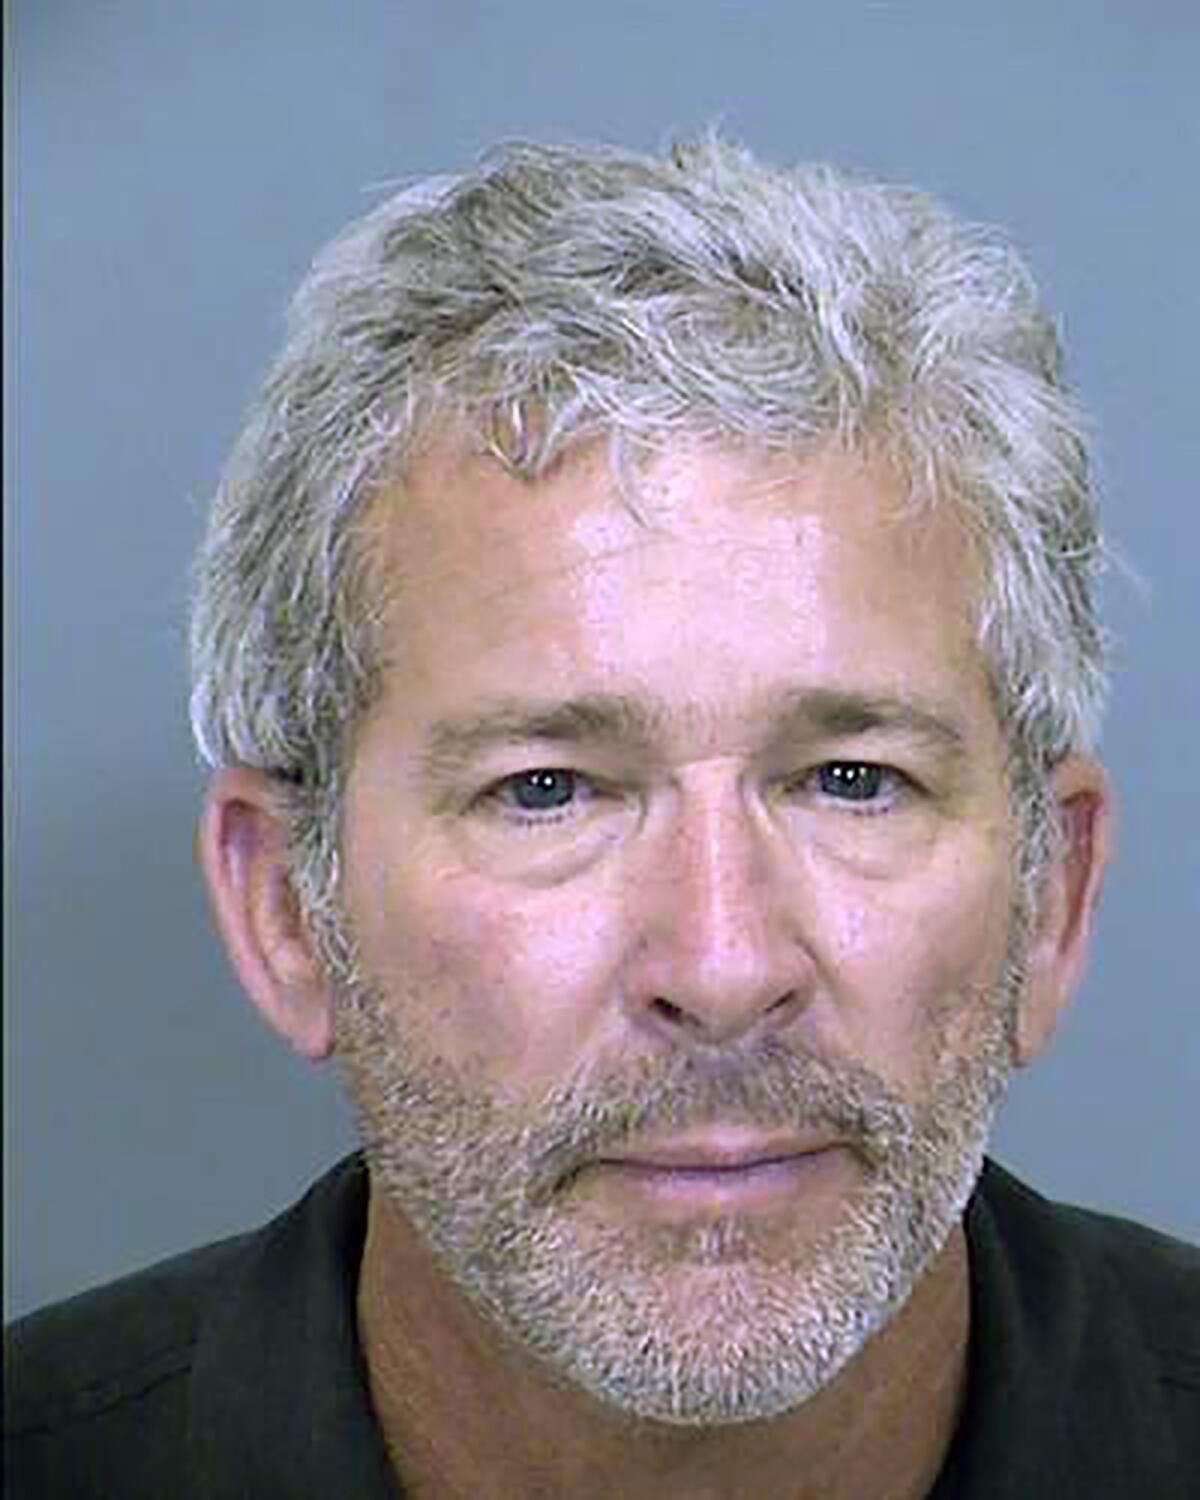 In this undated photo provided by the Maricopa County Sheriff's Office is Charles Rodrick, who is charged in Arizona with fraud and other charges in what prosecutors say was a harassment scheme to get payments from sex offenders in exchange for removing their names from a website he owned. Prosecutors say Rodrick and two other people received money for removing the names from Rodrick's site but failed to do so or republished the victims' profiles on other sites owned by Rodrick. At a court hearing Wednesday, April 7, 2021, Rodrick said authorities tried unsuccessfully to make a criminal case against him several years ago. (Maricopa County Sheriff's Office via AP)